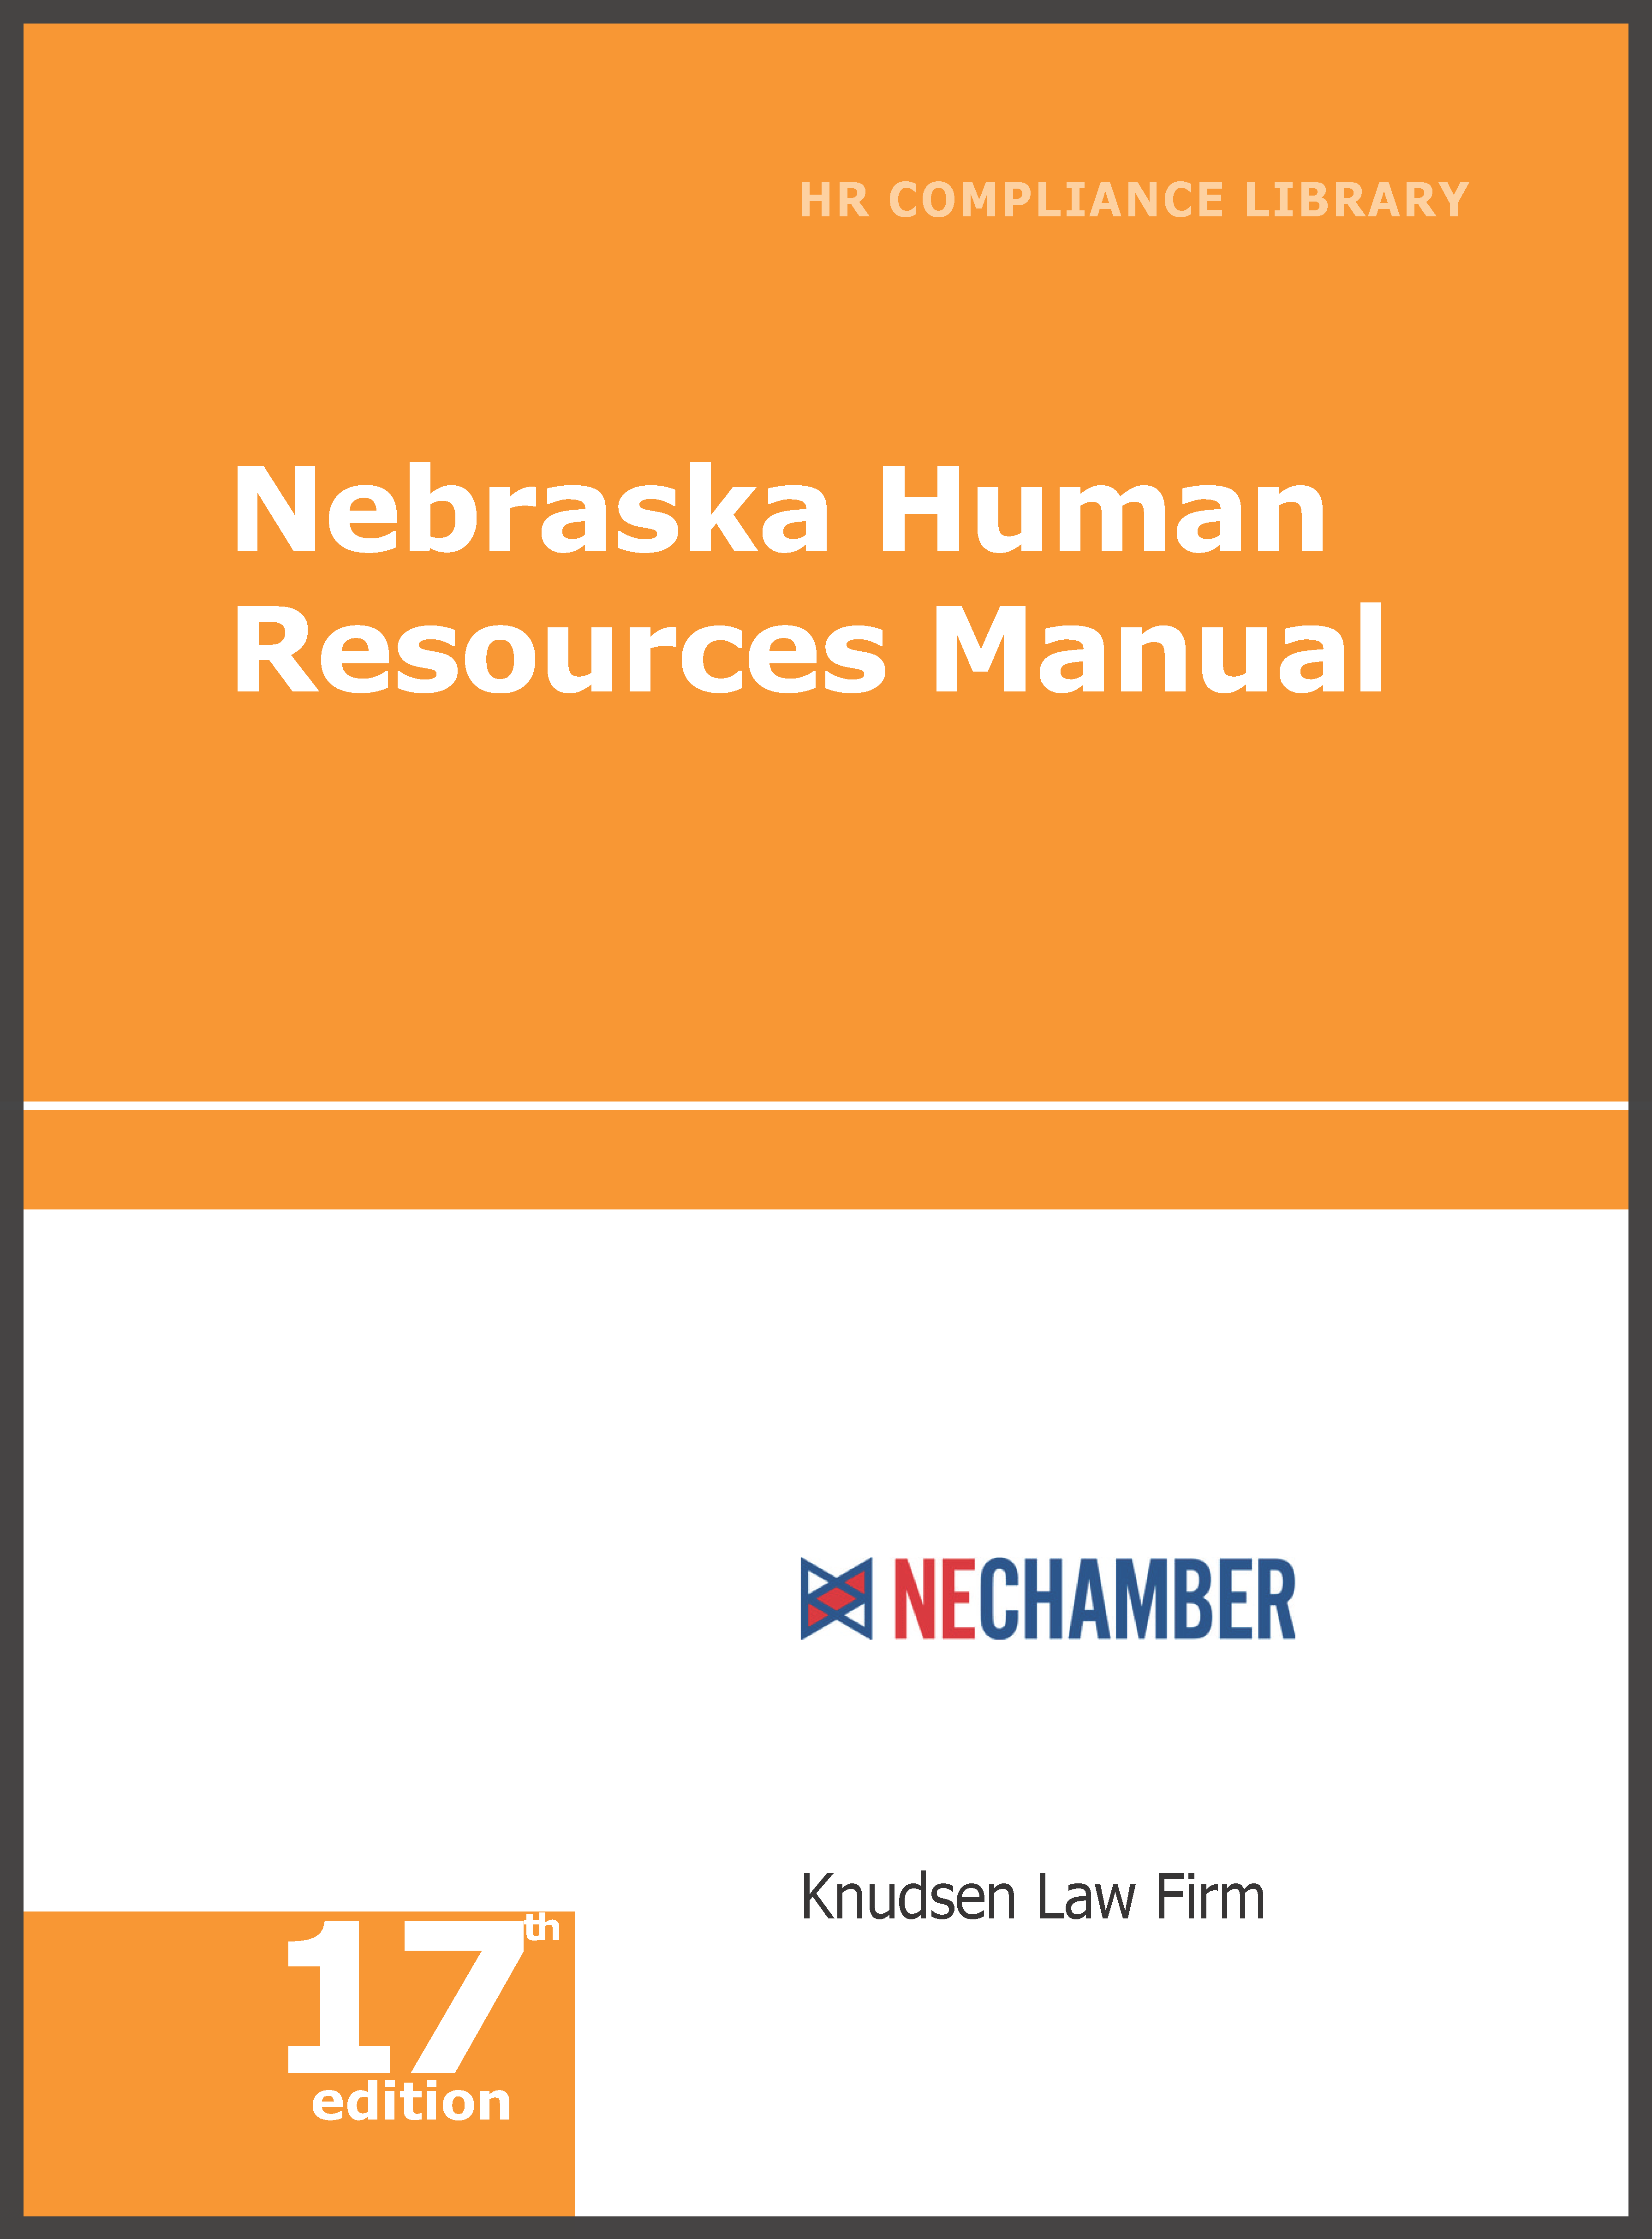 Nebraska Human Resources Library employment law image, remote work, labor laws, employment laws, right to work, order of protection, minimum wage